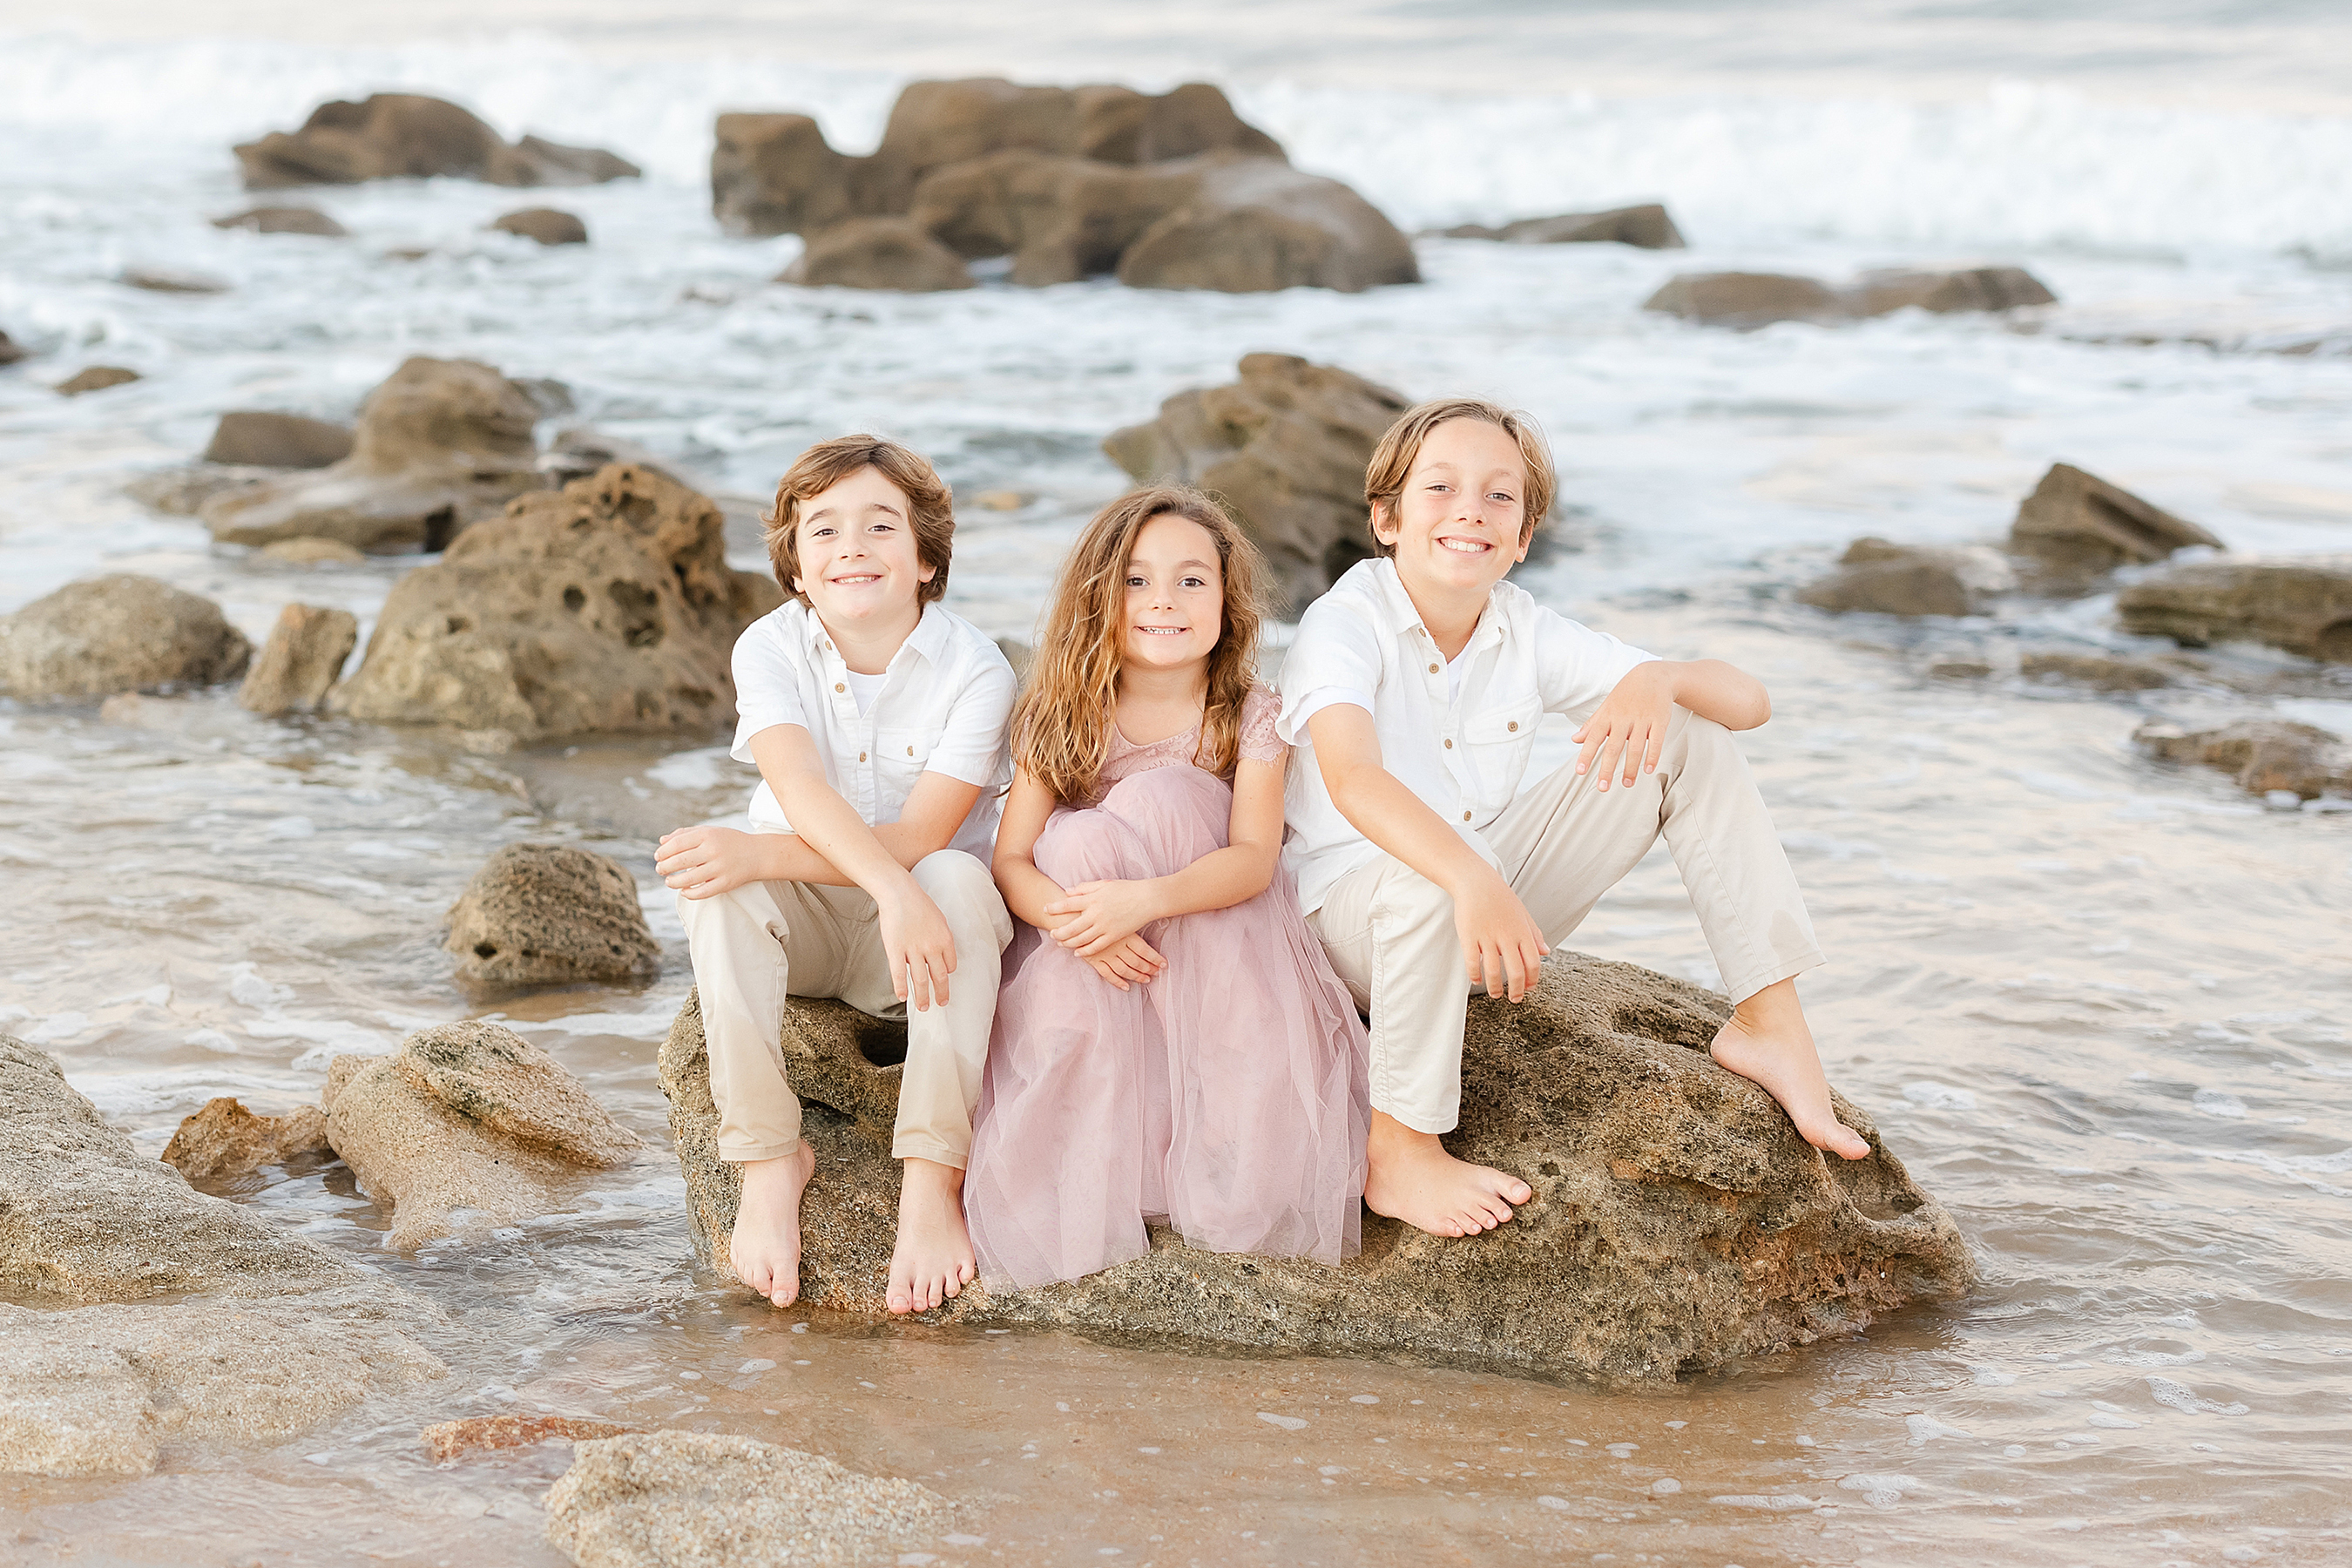 A sunset beach portrait of siblings sitting on the rocks together.